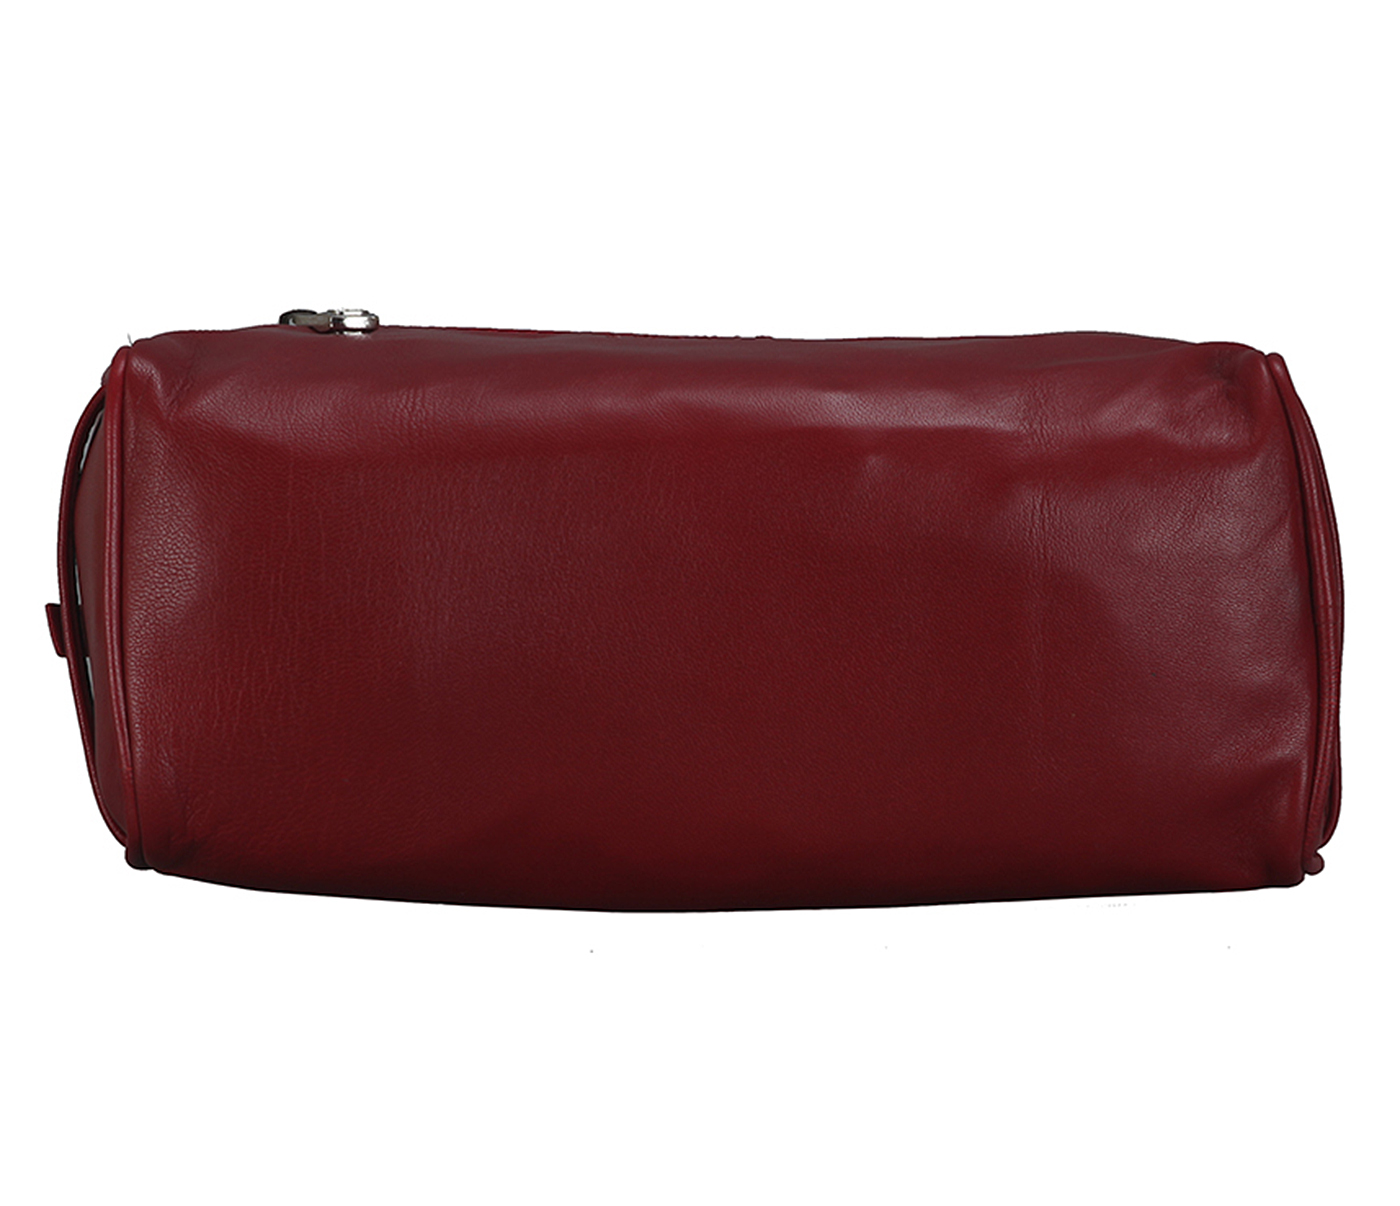 SC1--Unisex Wash And Toiletry Travel Pouch In Genuine Leather - Red